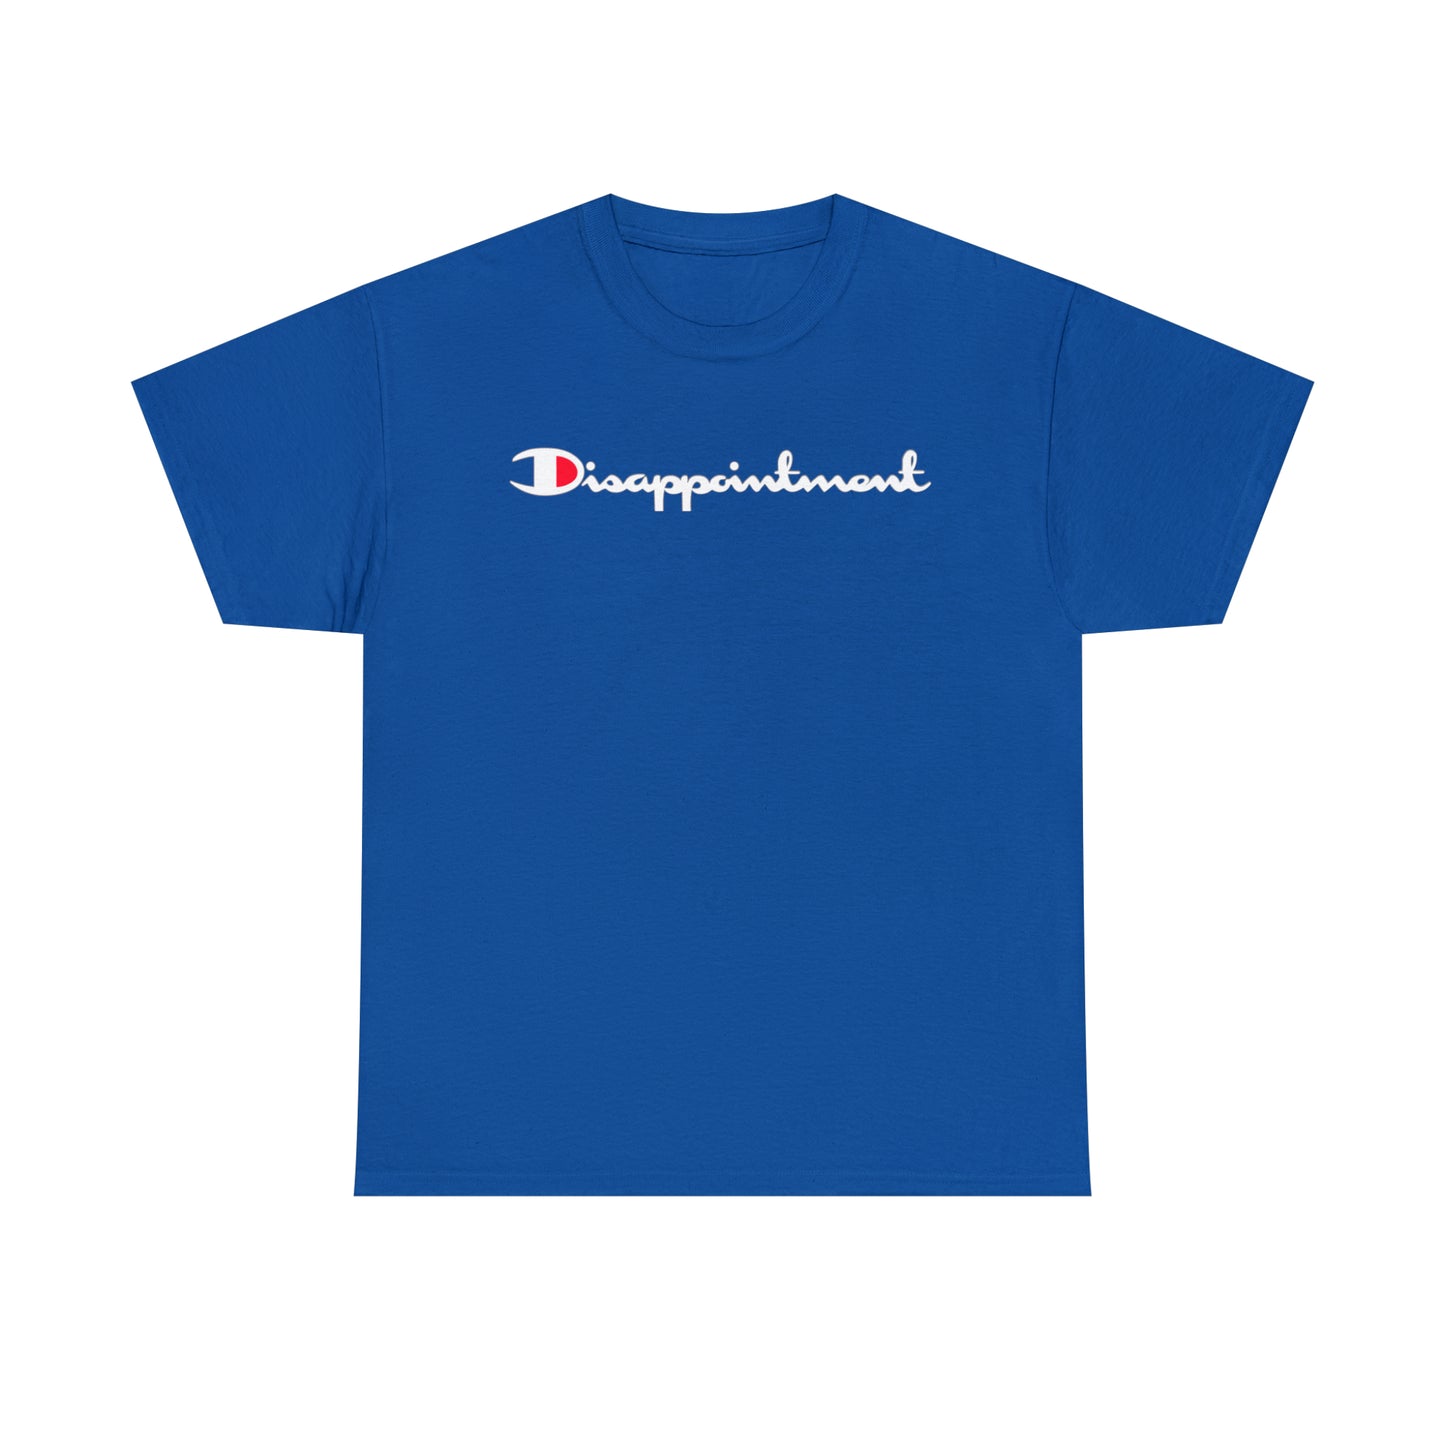 "Disappointment" Tee